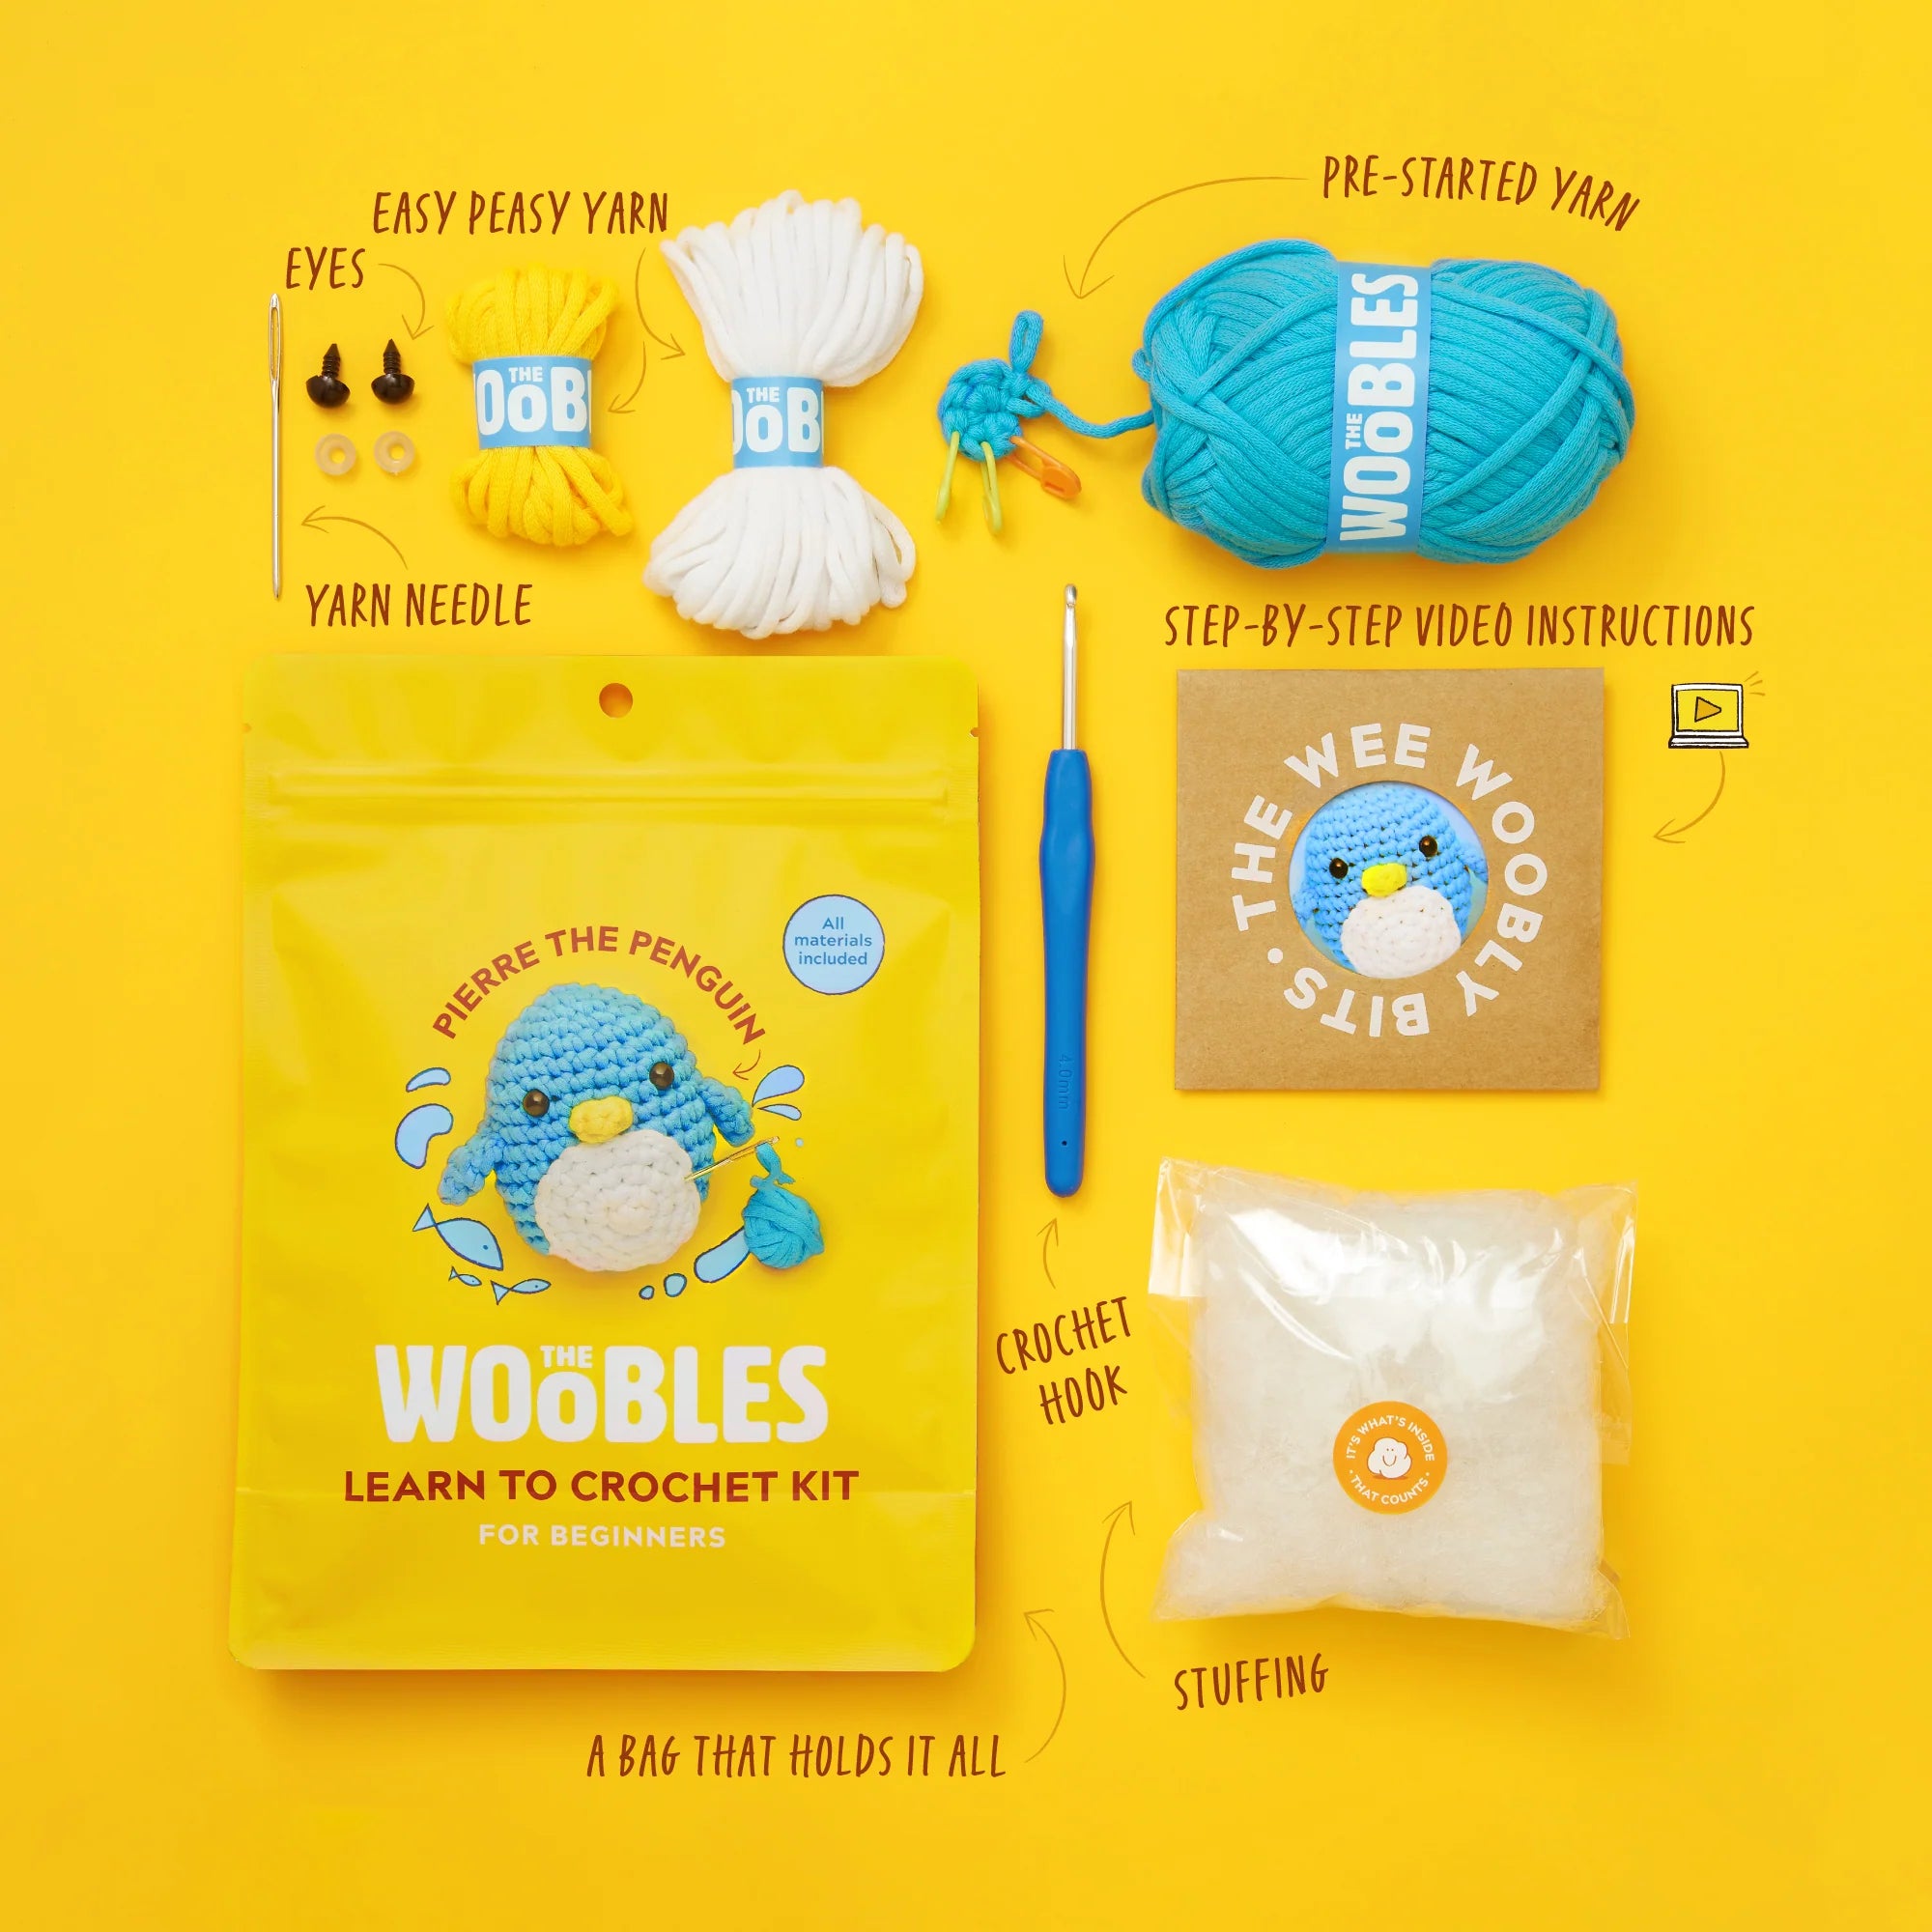 The Woobles Kits